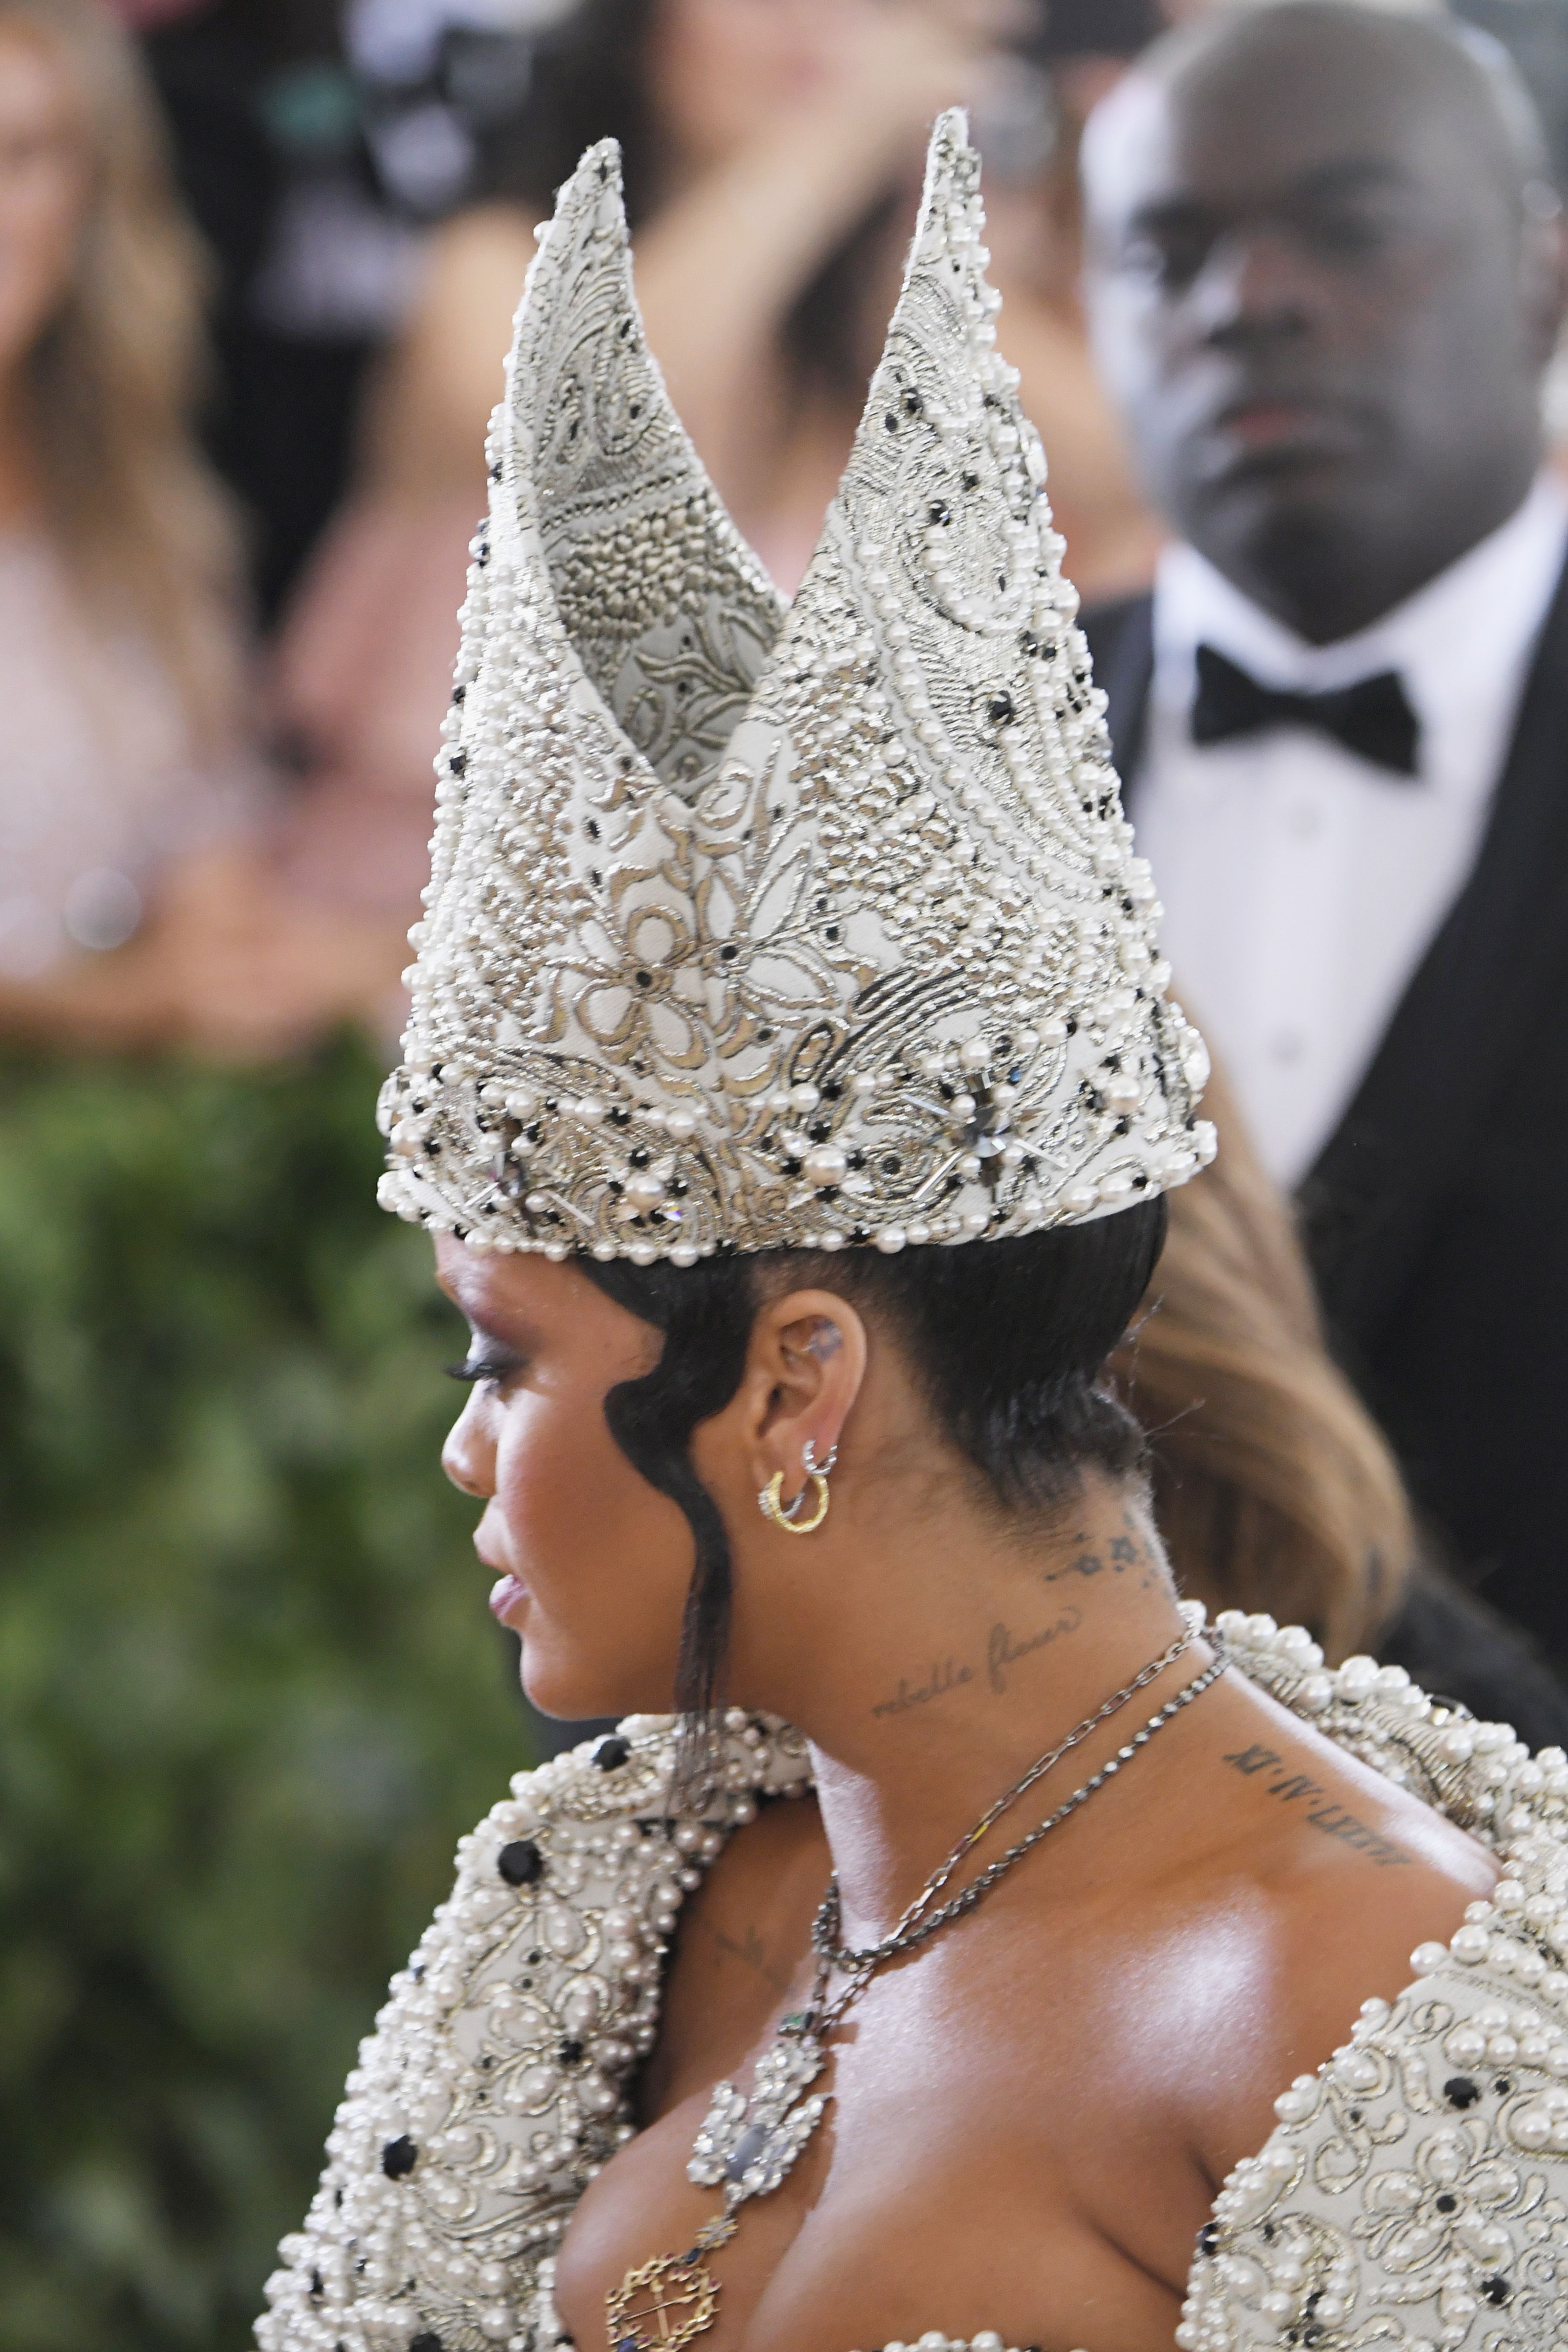 Rihanna Slays in Pope-Inspired Dress and Hat at the 2018 Met Gala